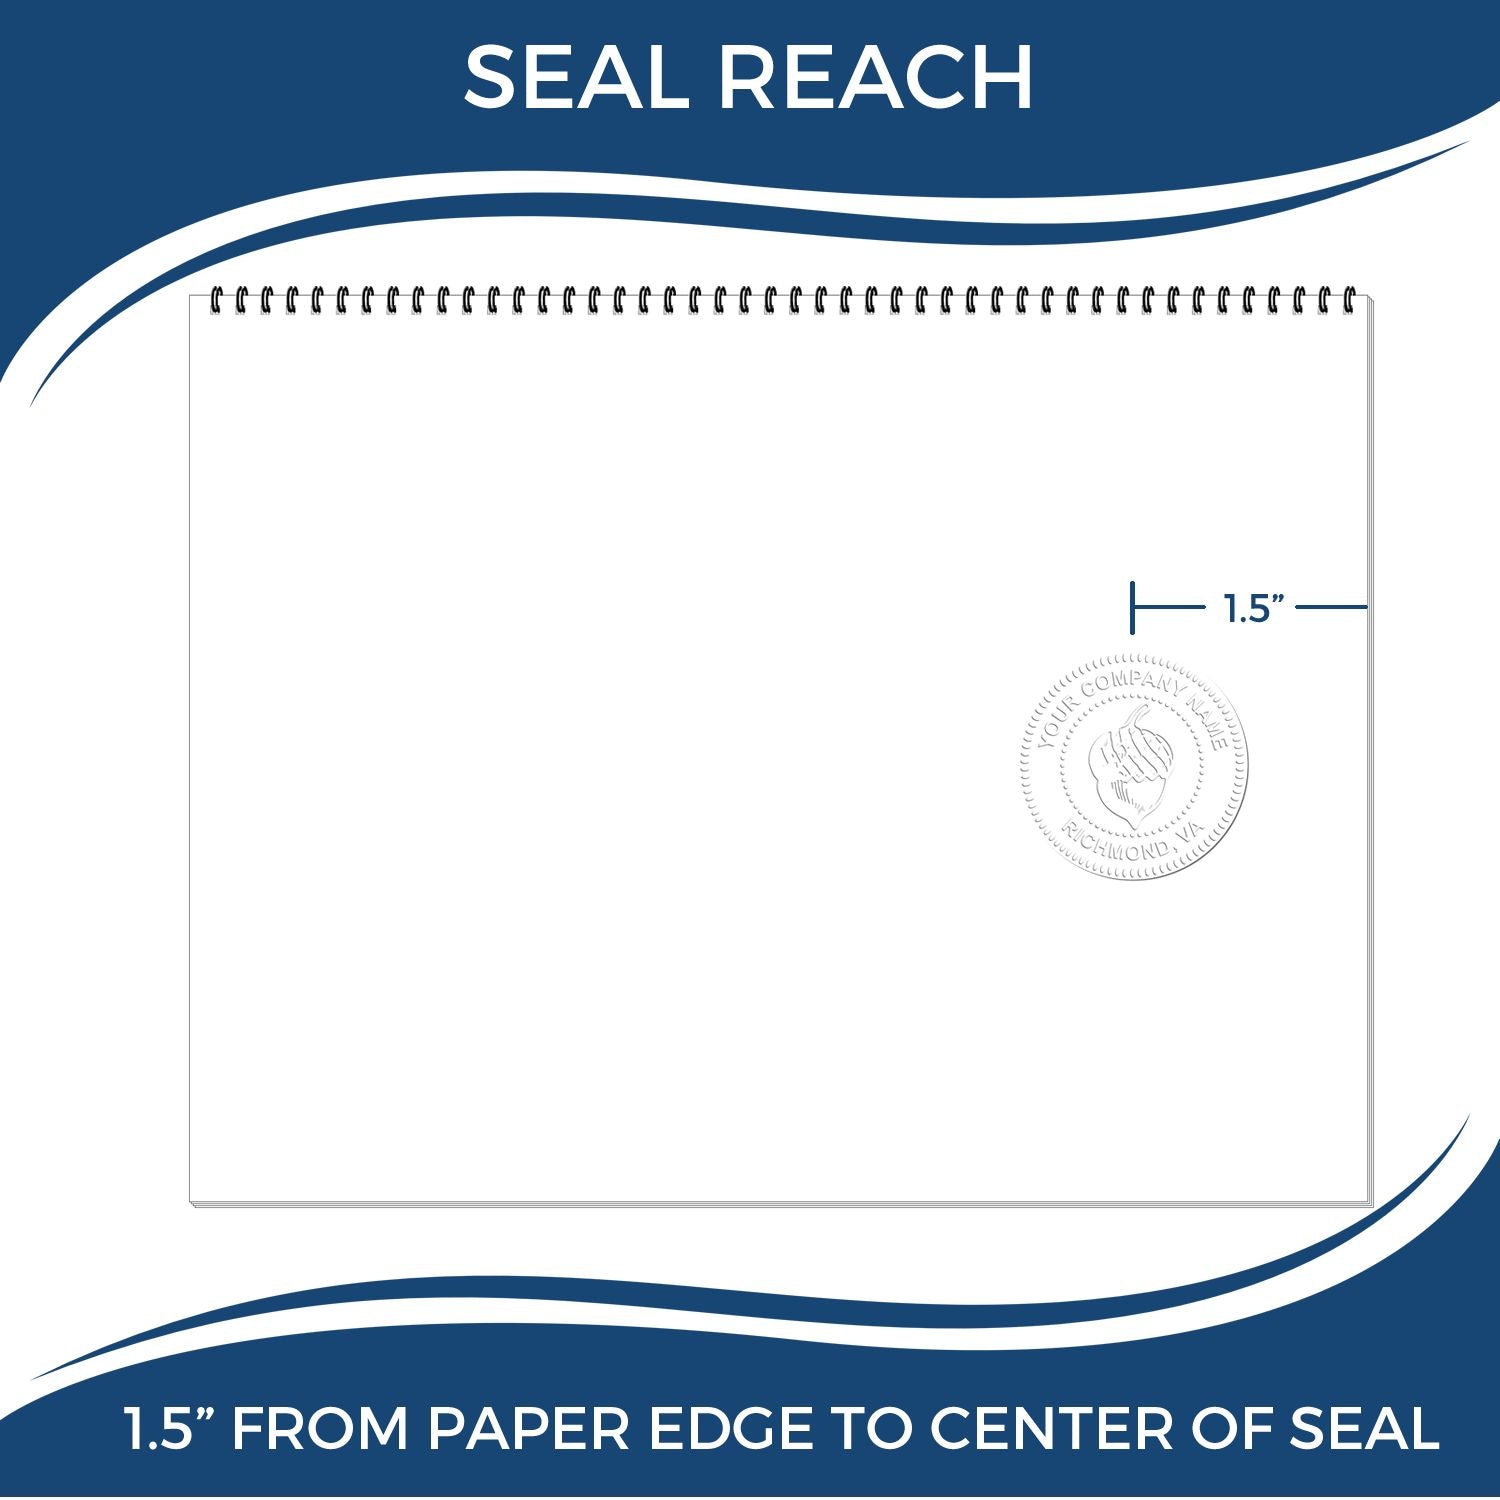 An infographic showing the seal reach which is represented by a ruler and a miniature seal image of the Handheld New York Land Surveyor Seal